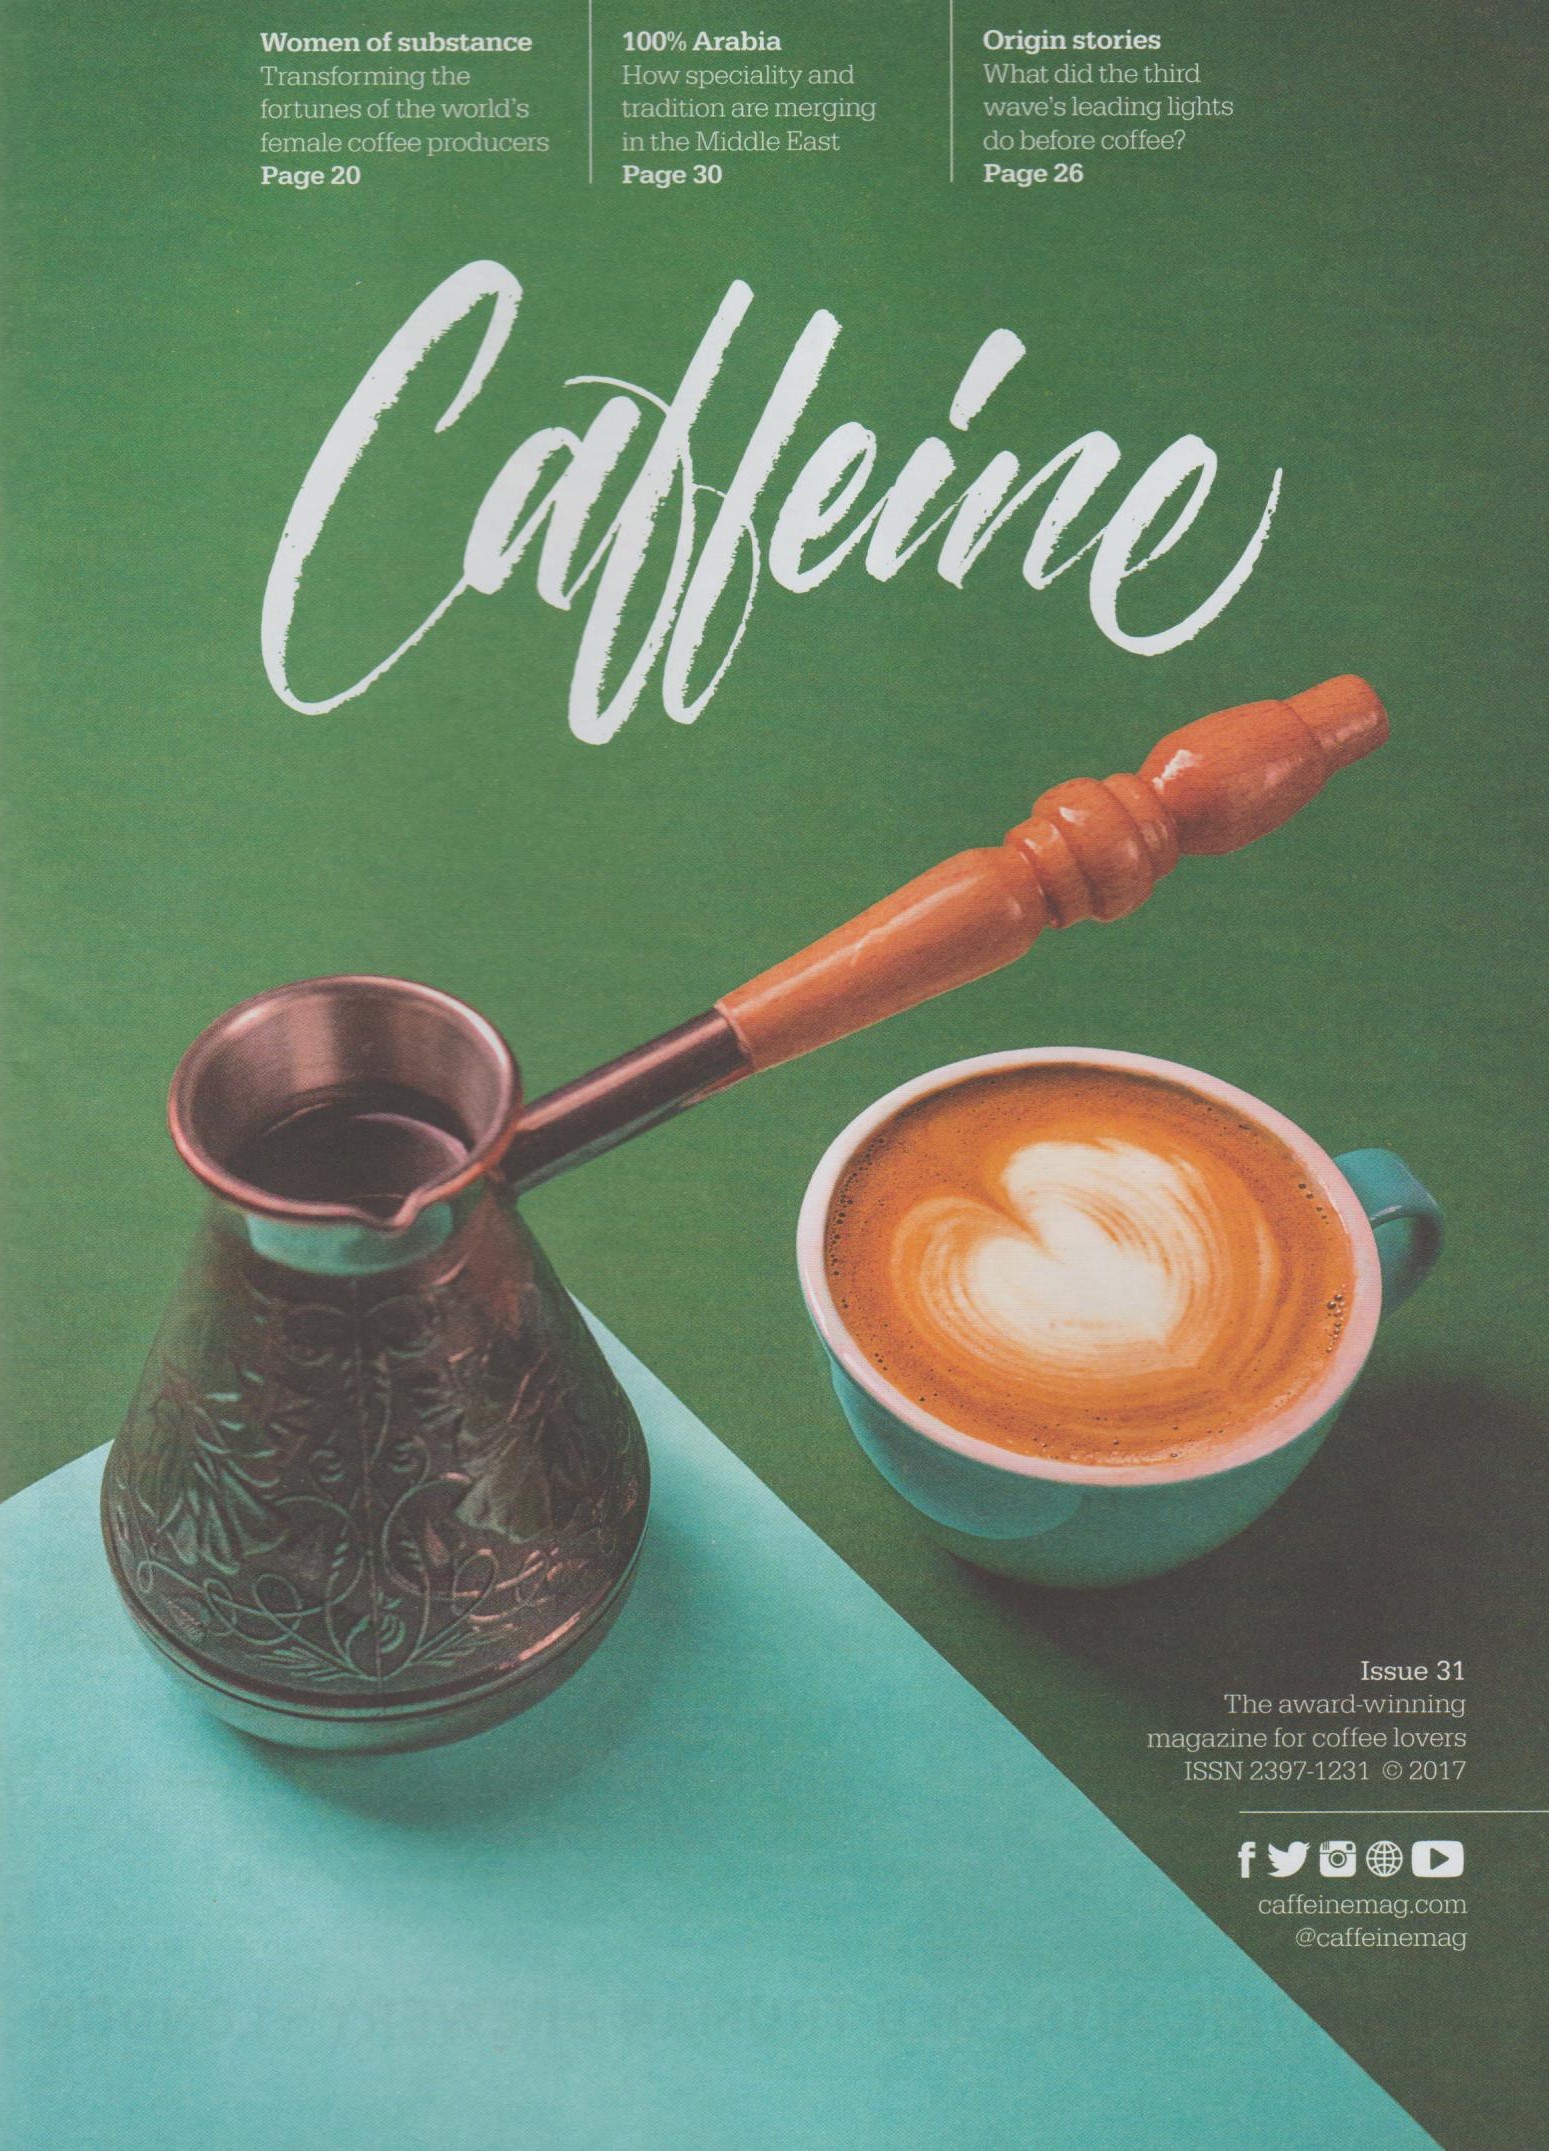 The cover of Caffeine Magazine, Issue 31, juxtapositioning traditional Arabic coffee on the left against the modern flat white on the right.